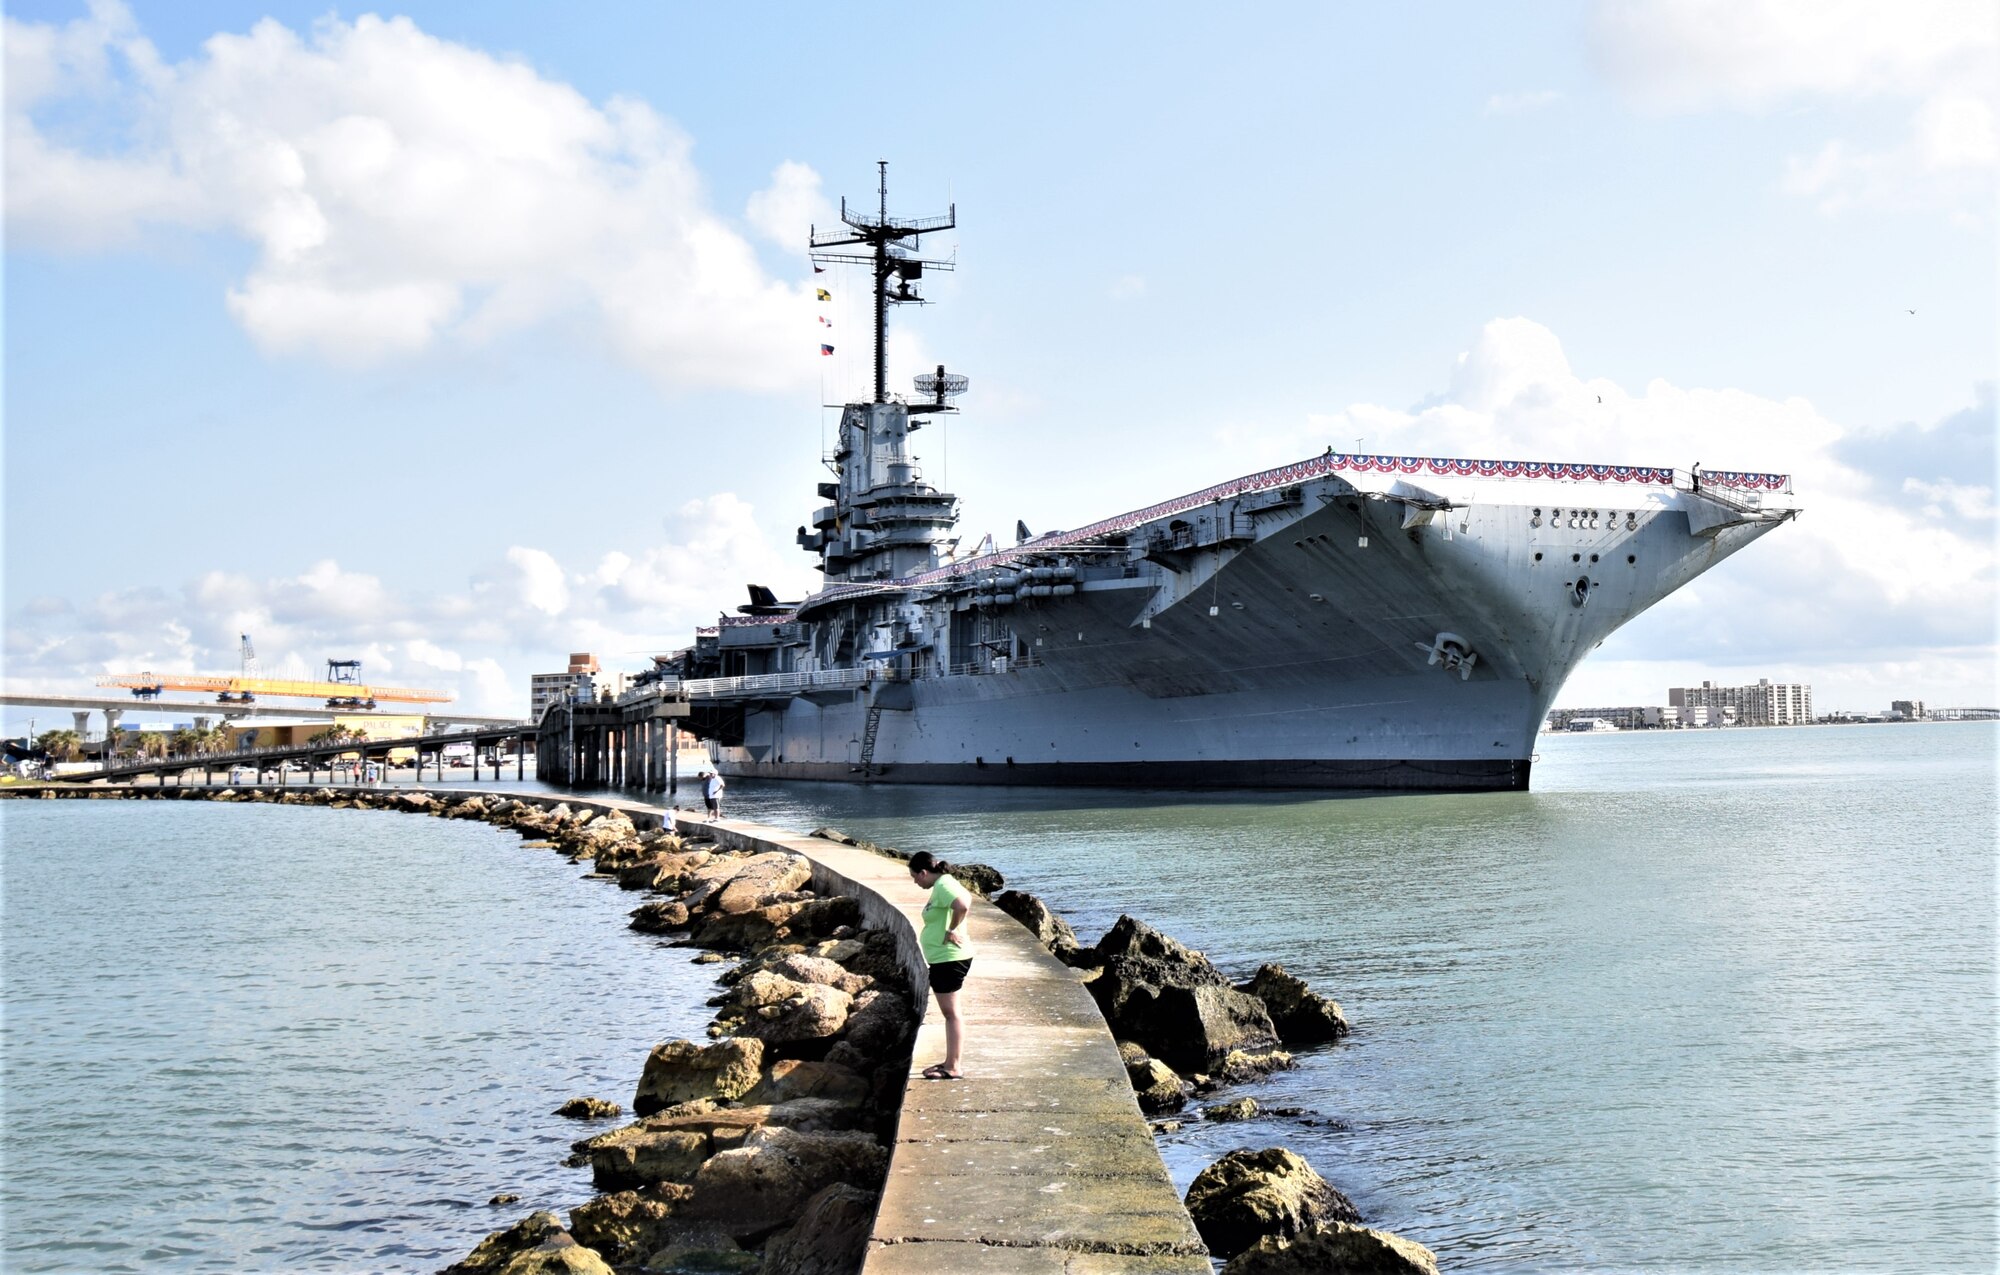 The USS Lexington Aircraft carrier seen docked during a tour to Corpus Christi. DLIELC offers over 200 tours a year to a wide variety of locations. (Feb 2020 by Spencer Berry)